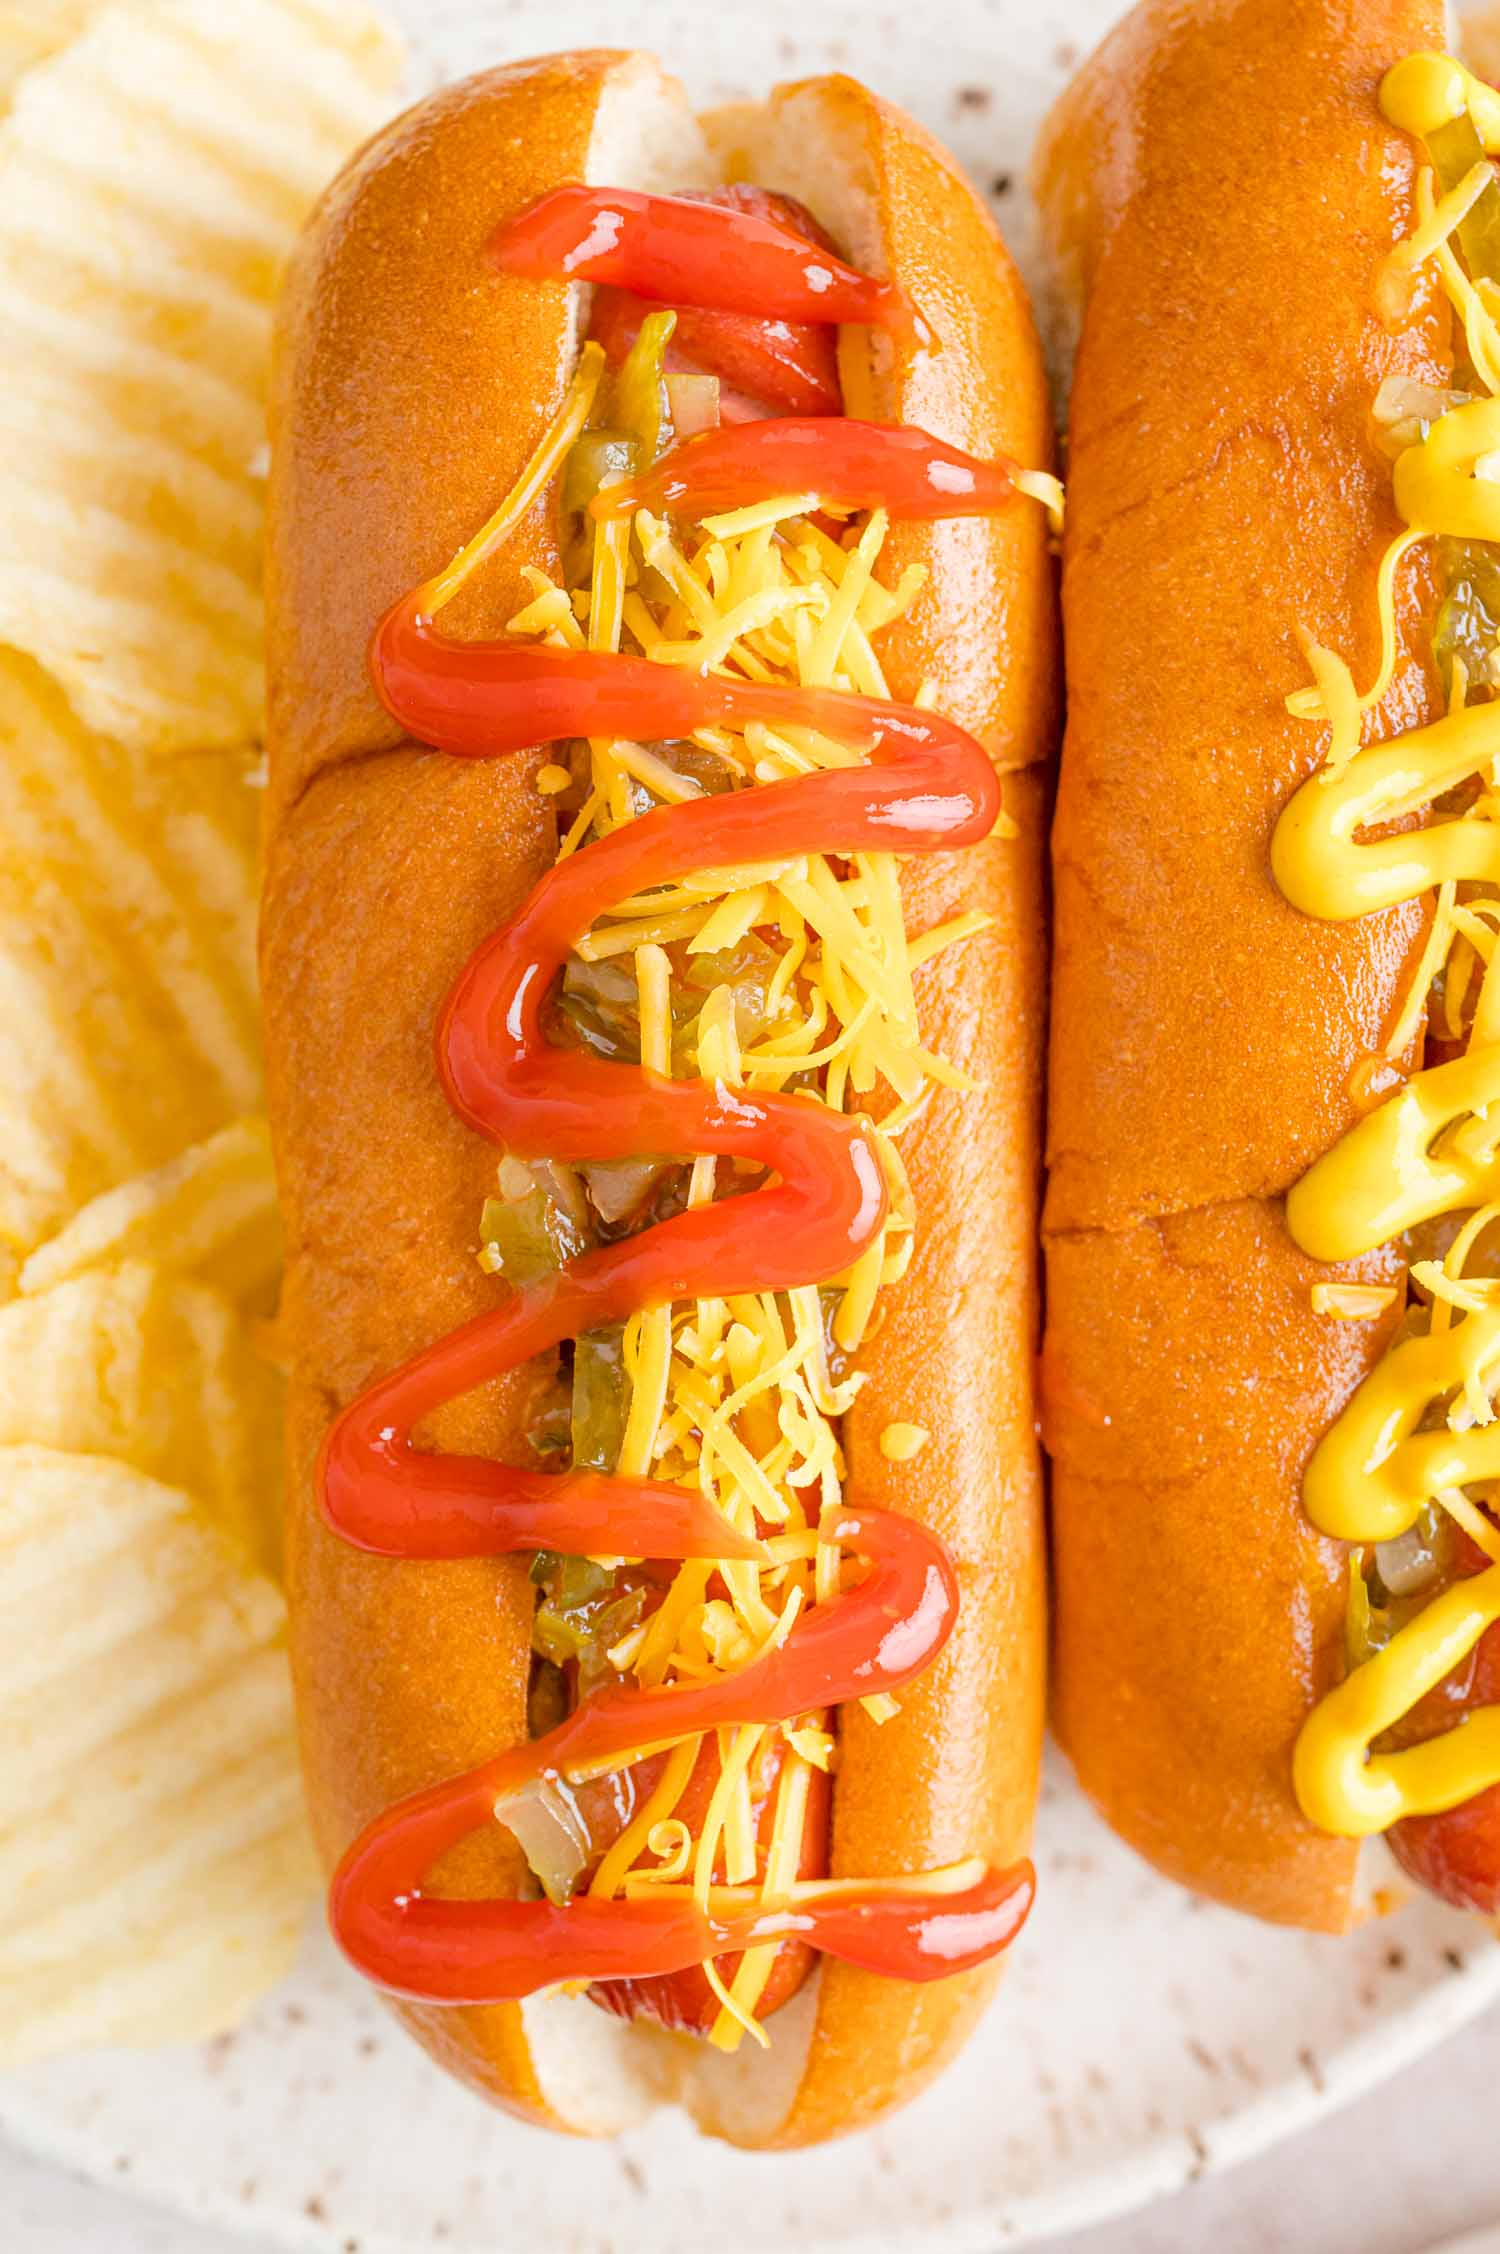 Hot dogs with toppings.